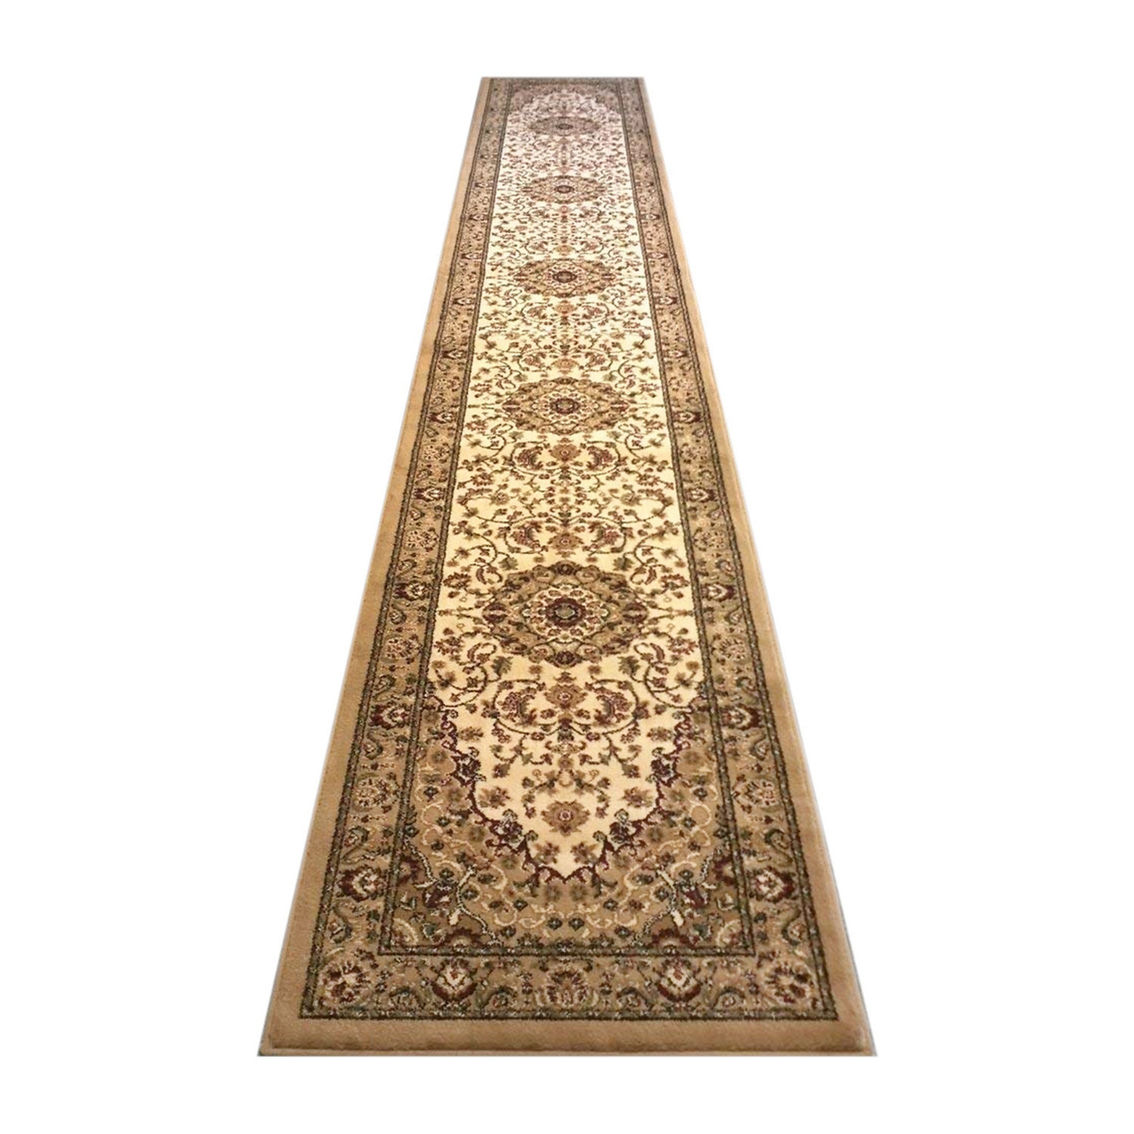 Flash Furniture 3' x 20' Traditional Persian Style Area Rug - Image 2 of 5